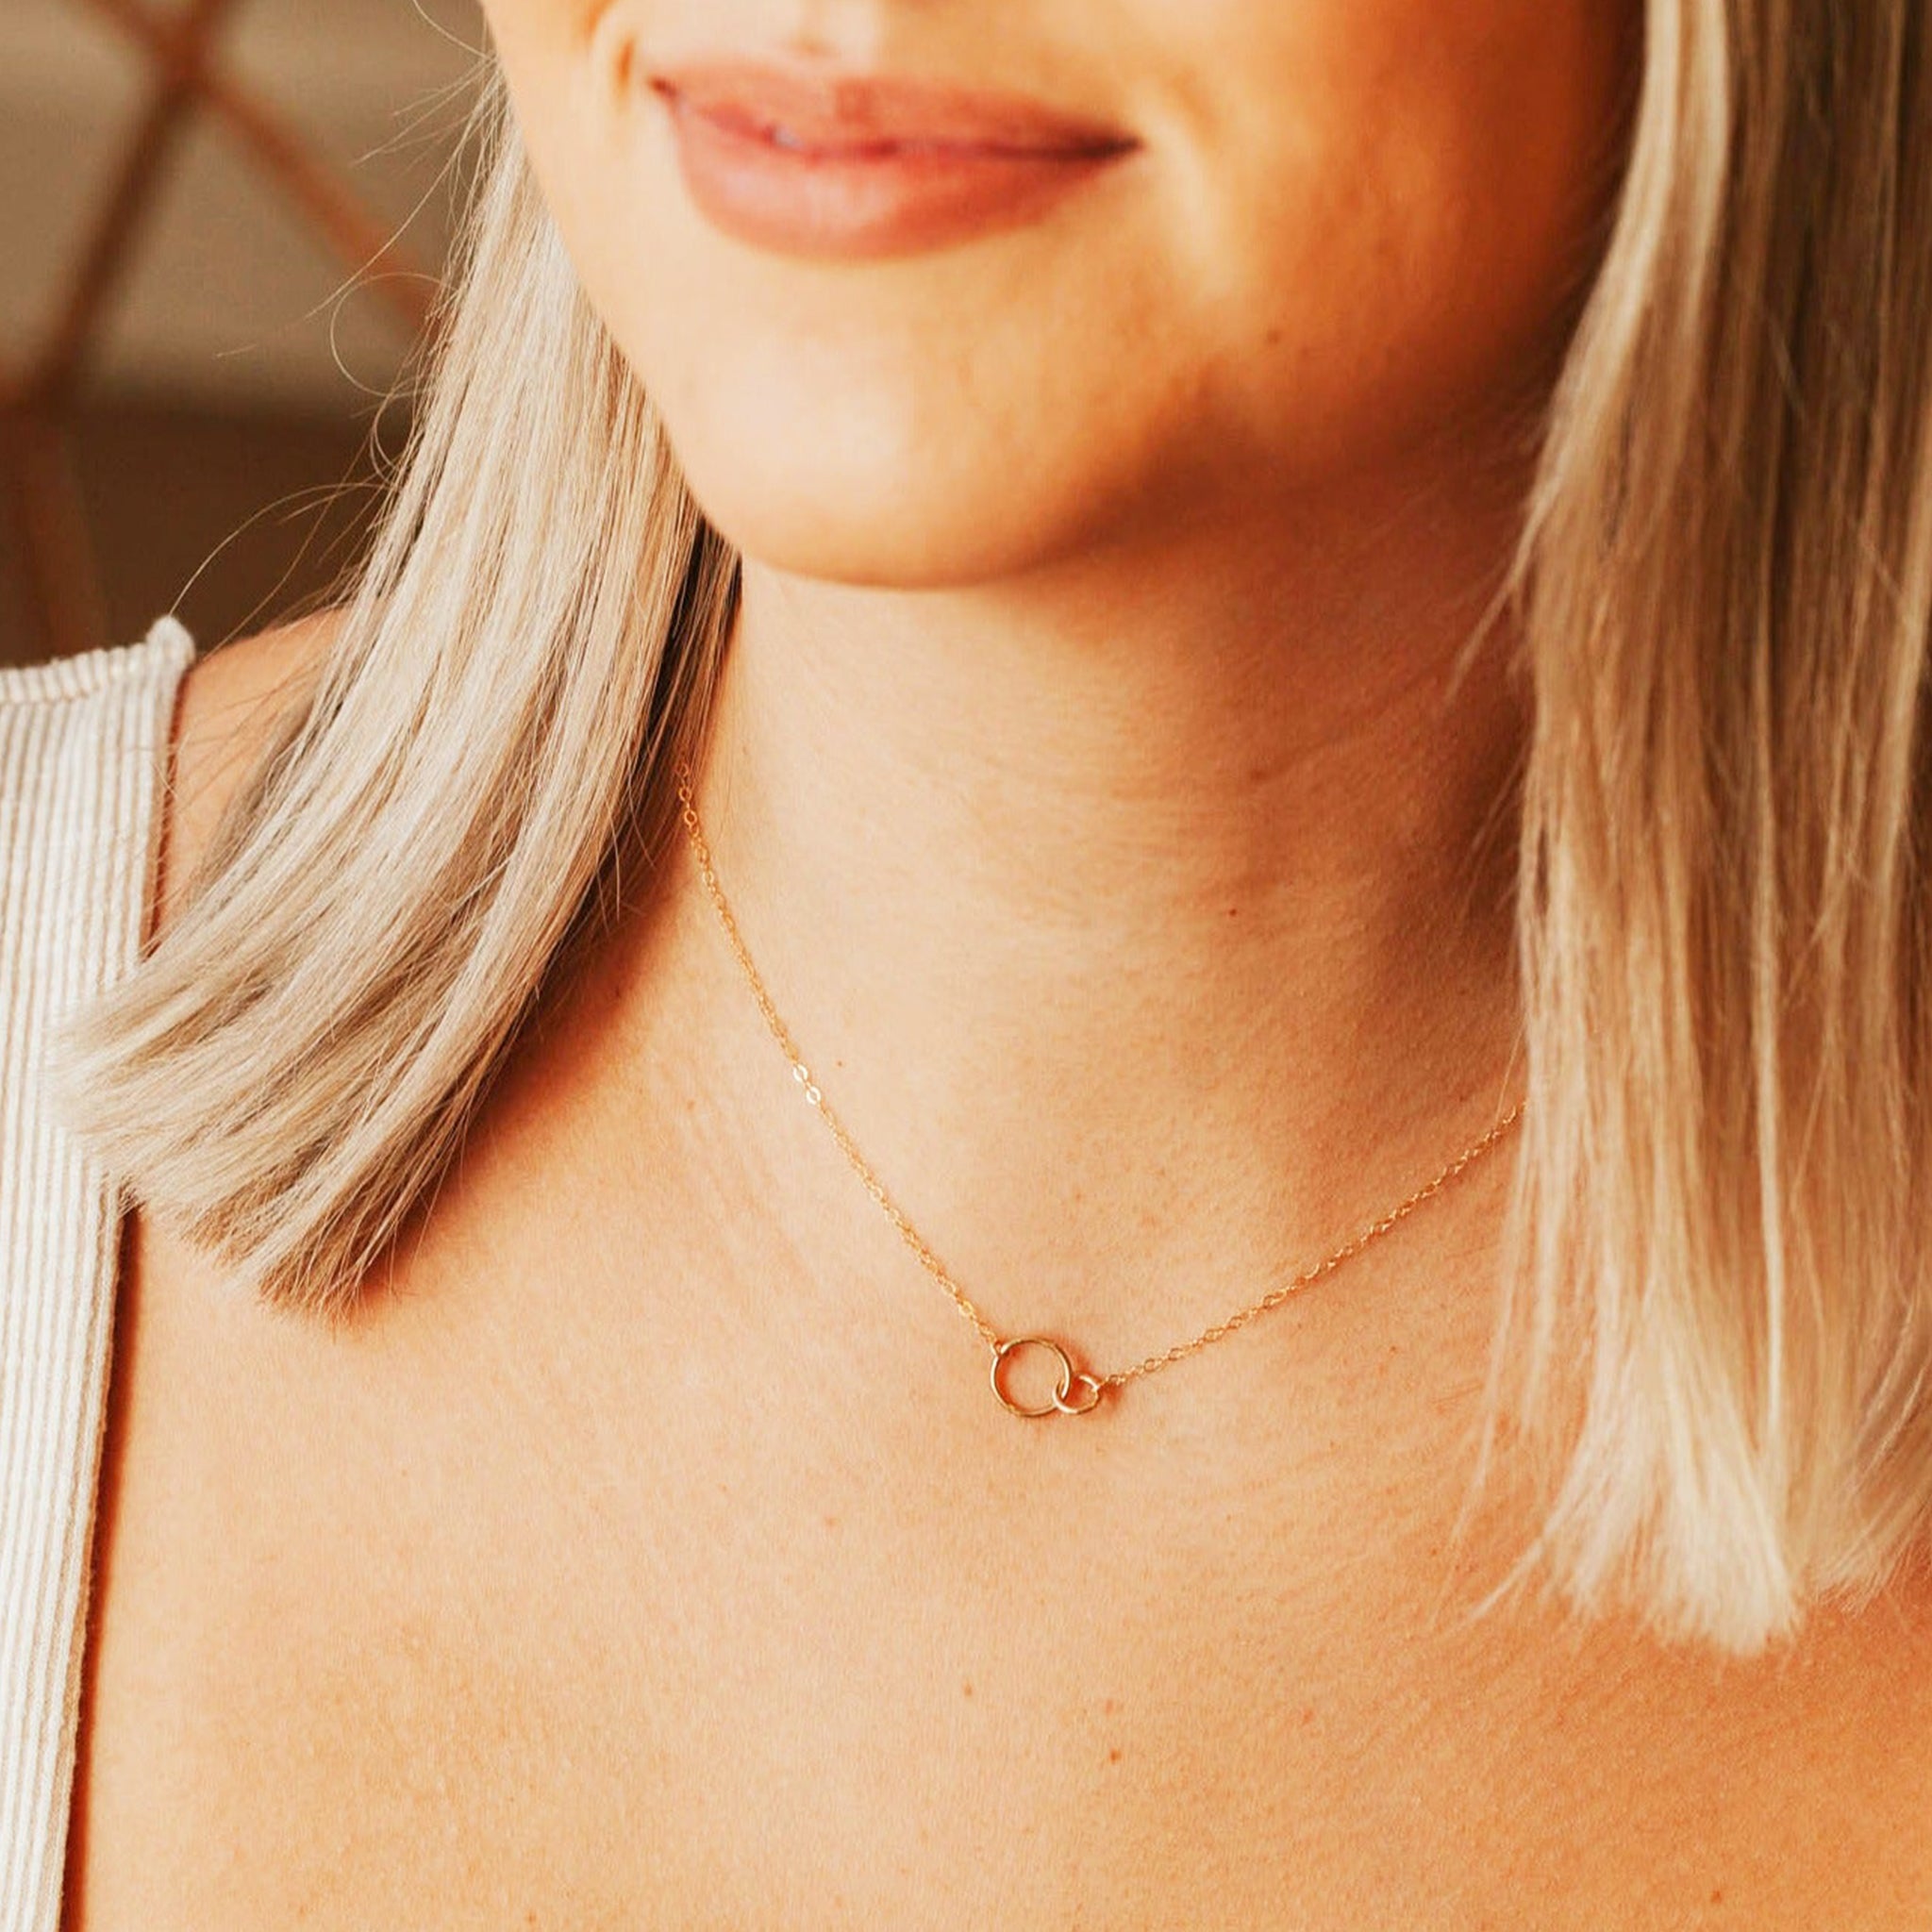 A dainty gold chain necklace with two different sized circle links connecting in the center.